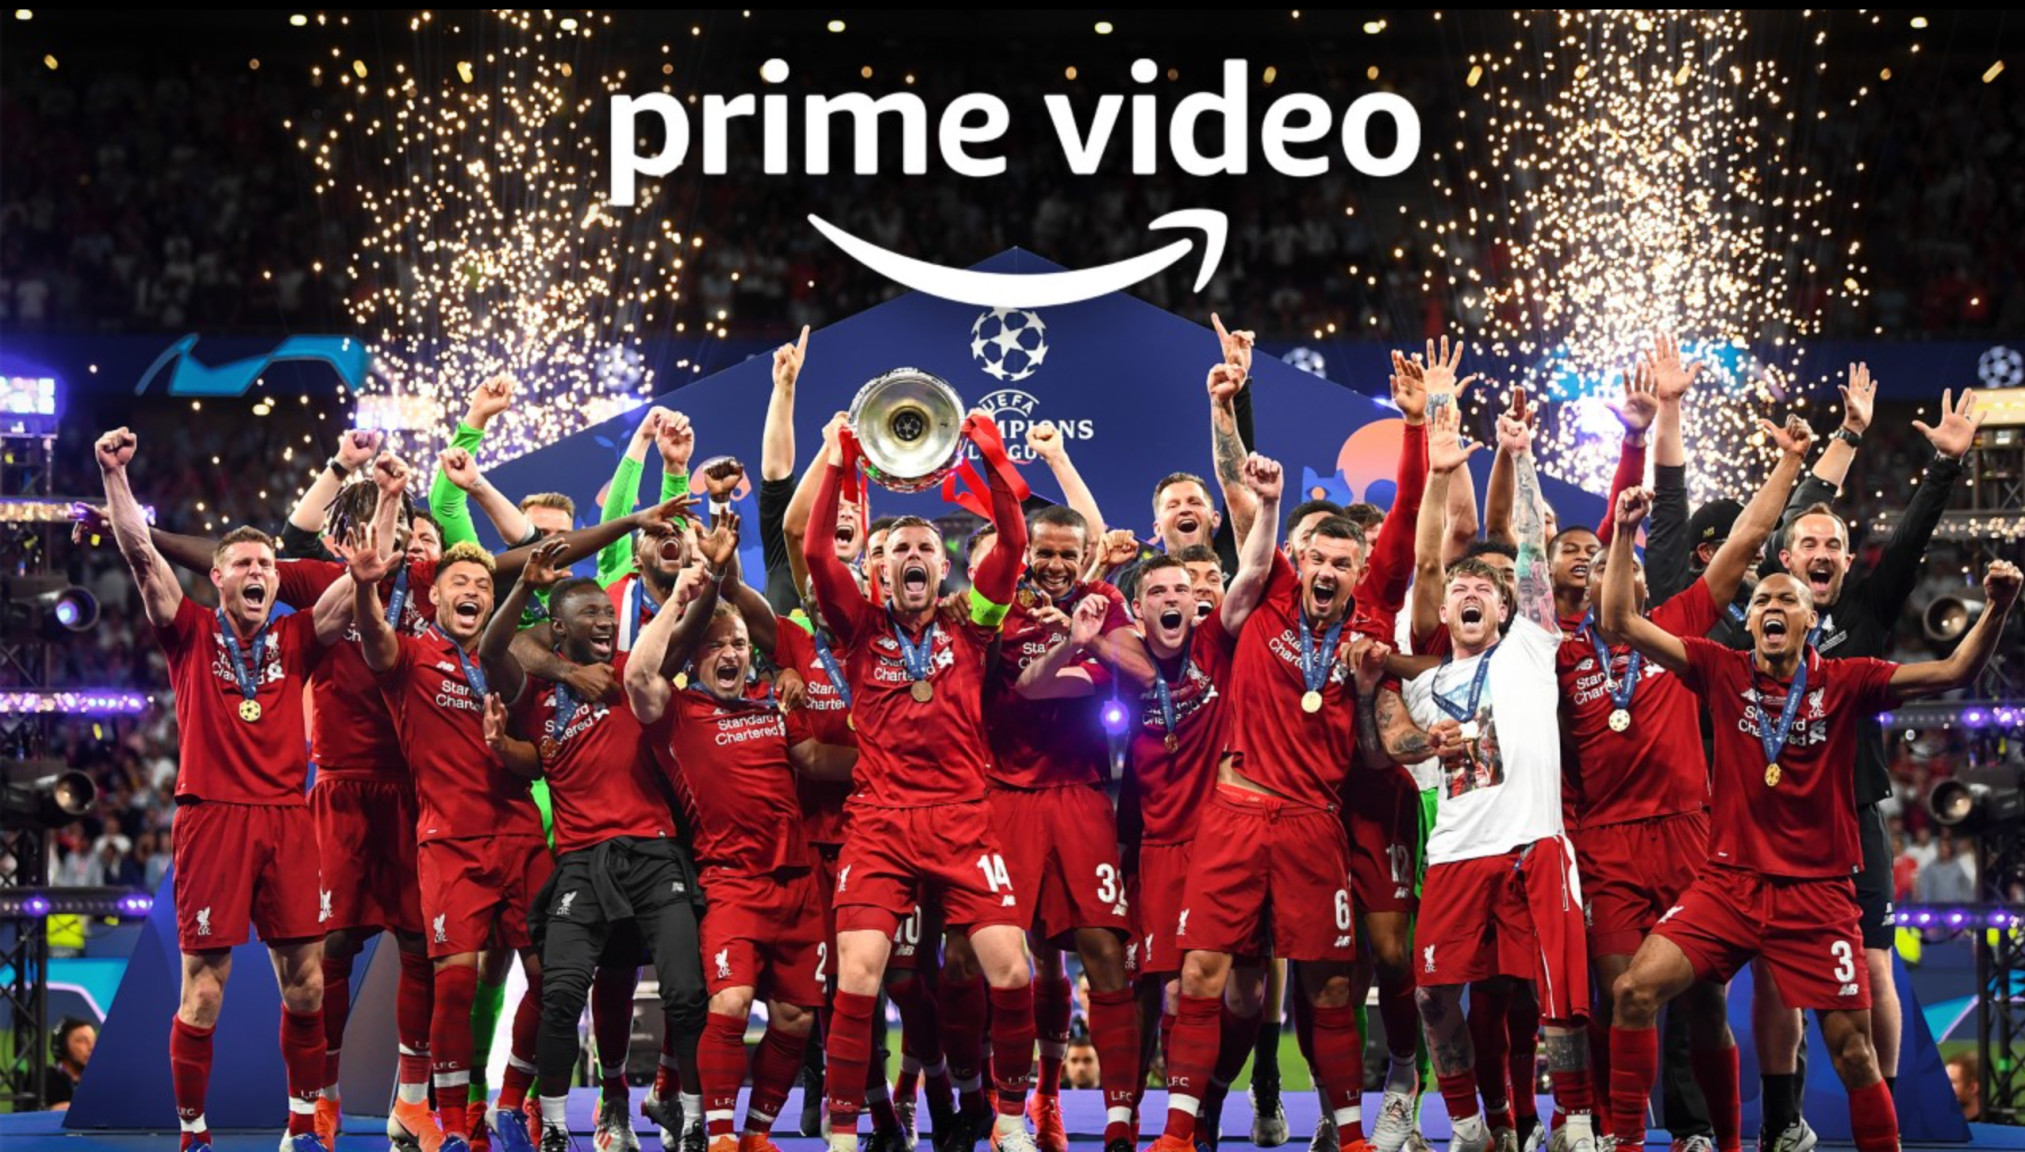 Prime video charge 5.99